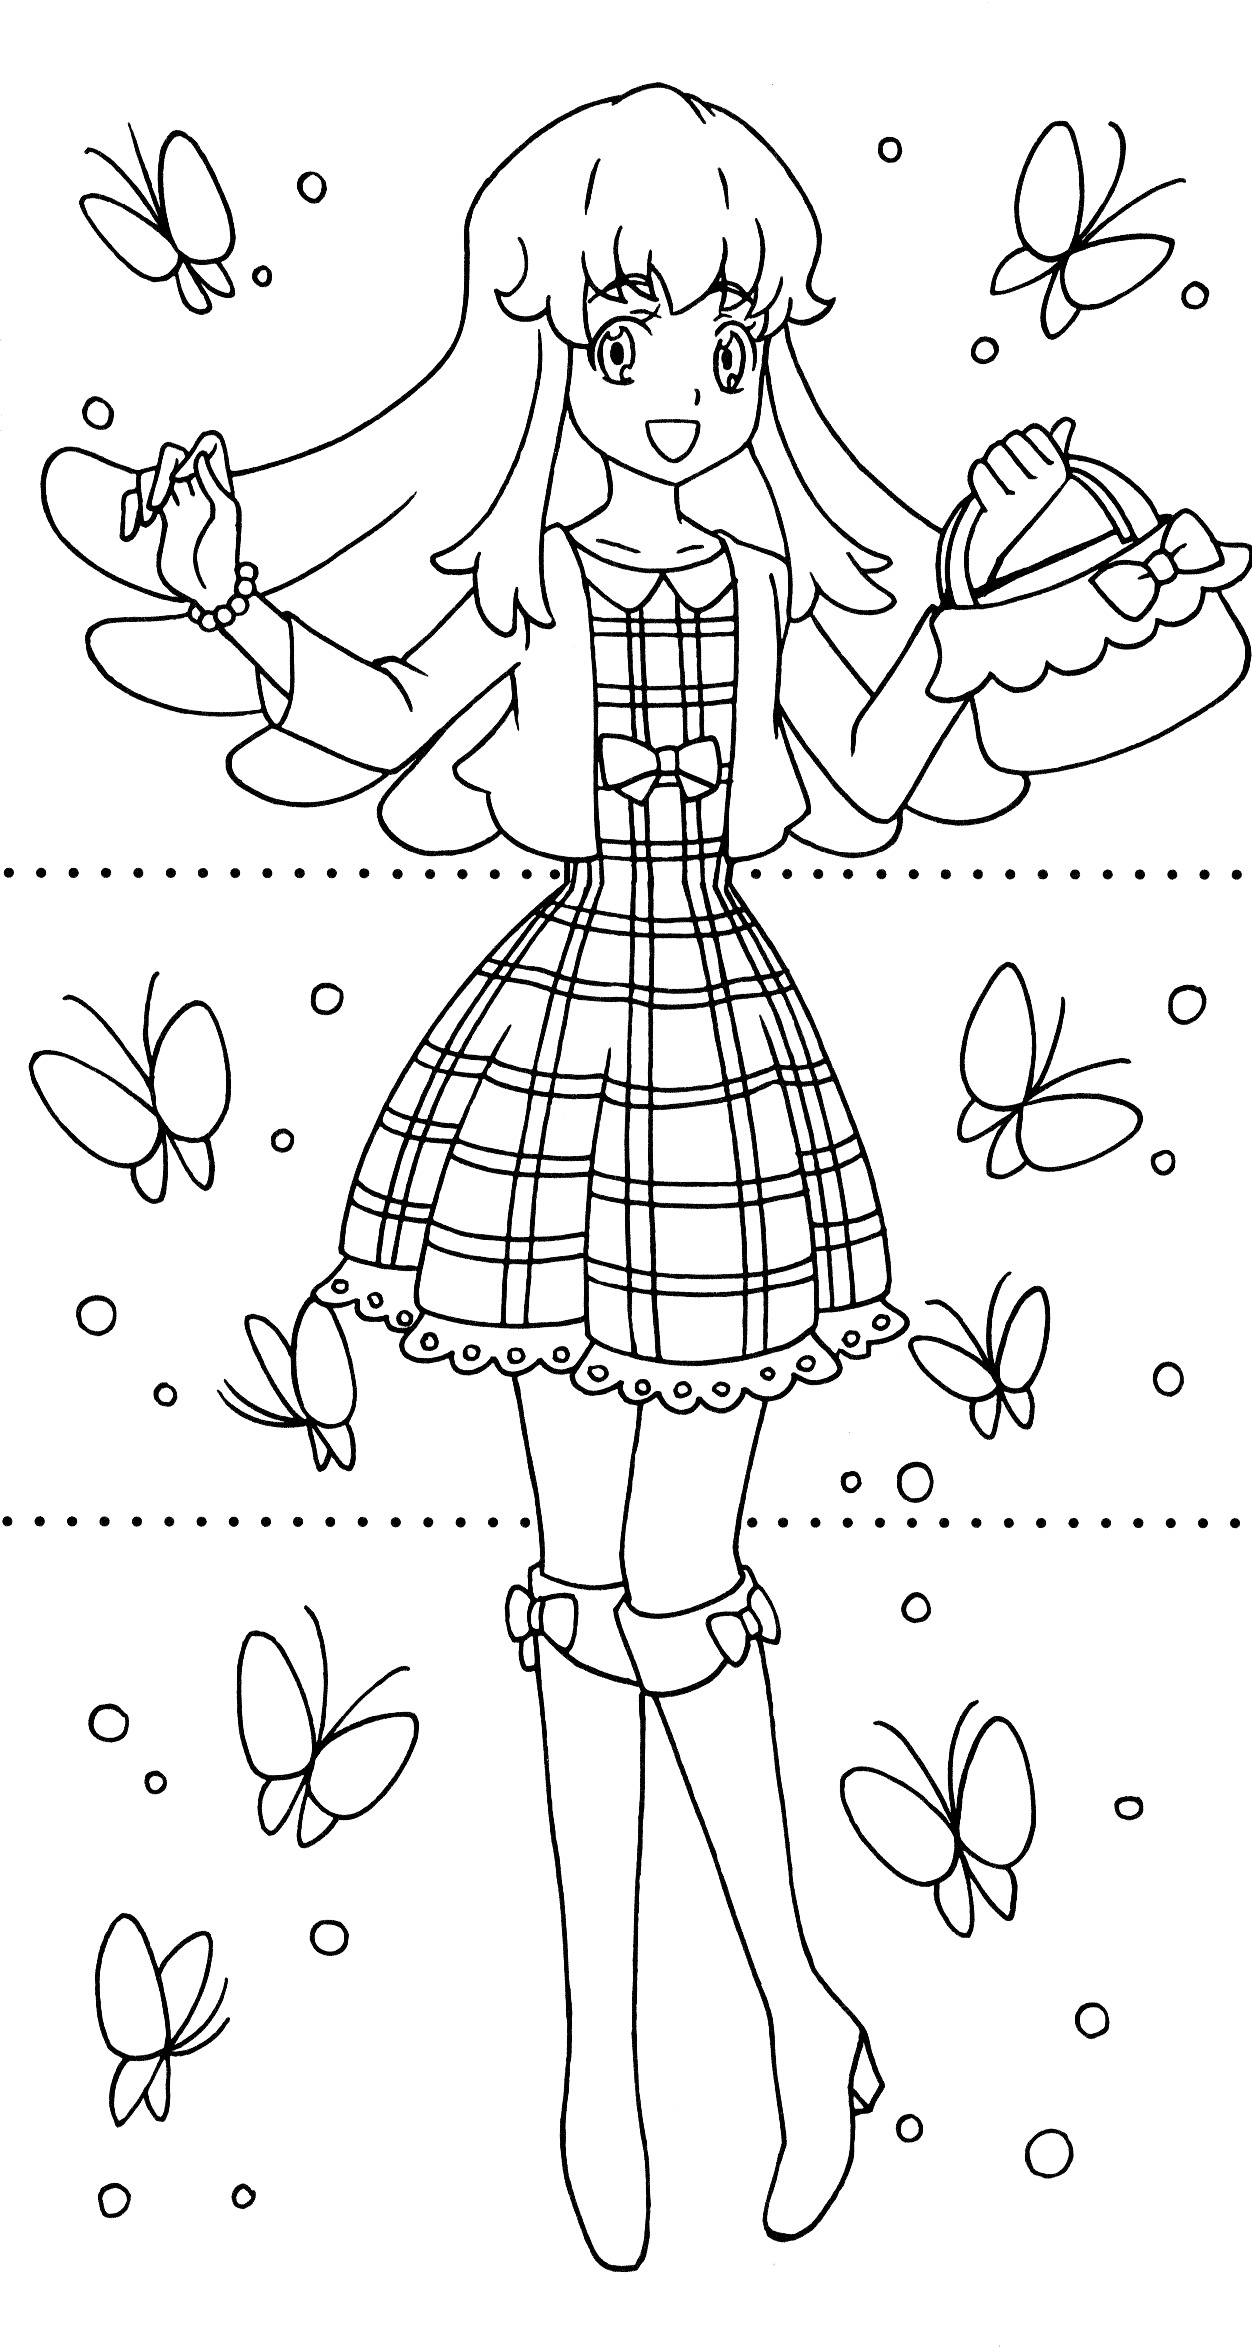 Happiness Charge Precure Dressup Coloring Book 9